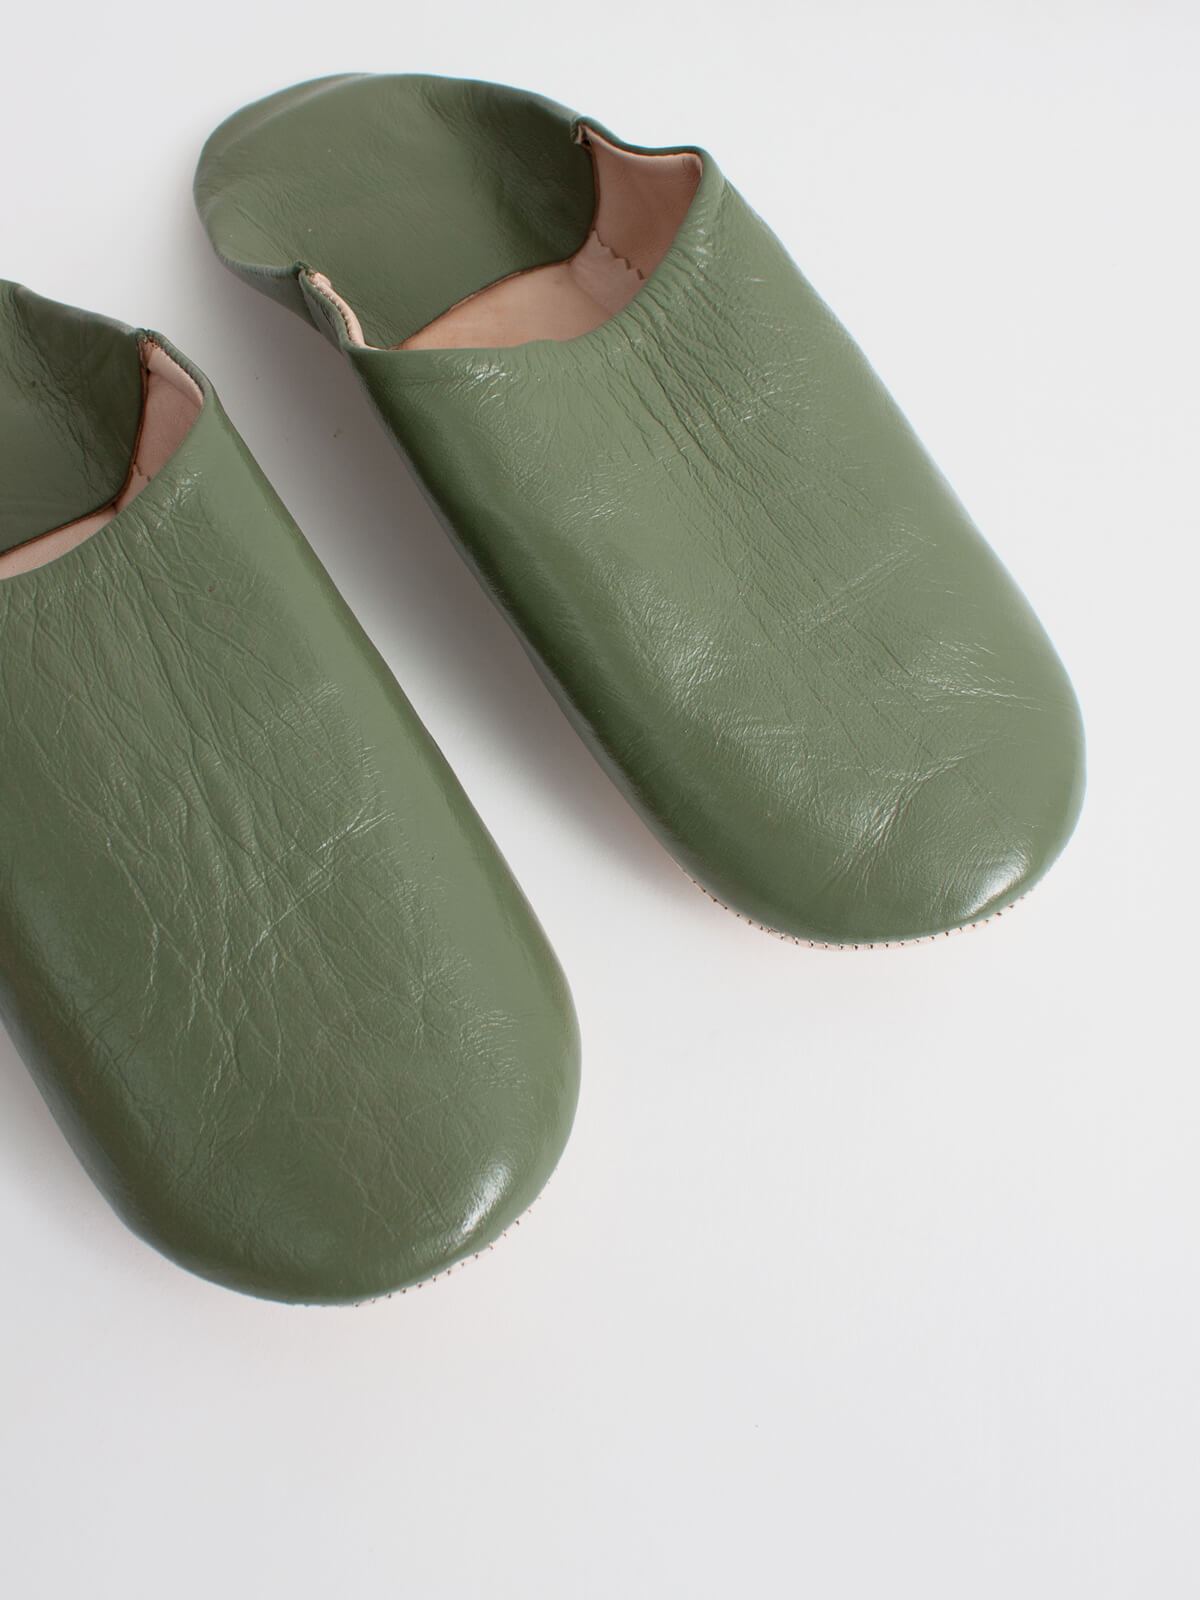 MOROCCAN MENS BABOUCHE SLIPPERS - OLIVE